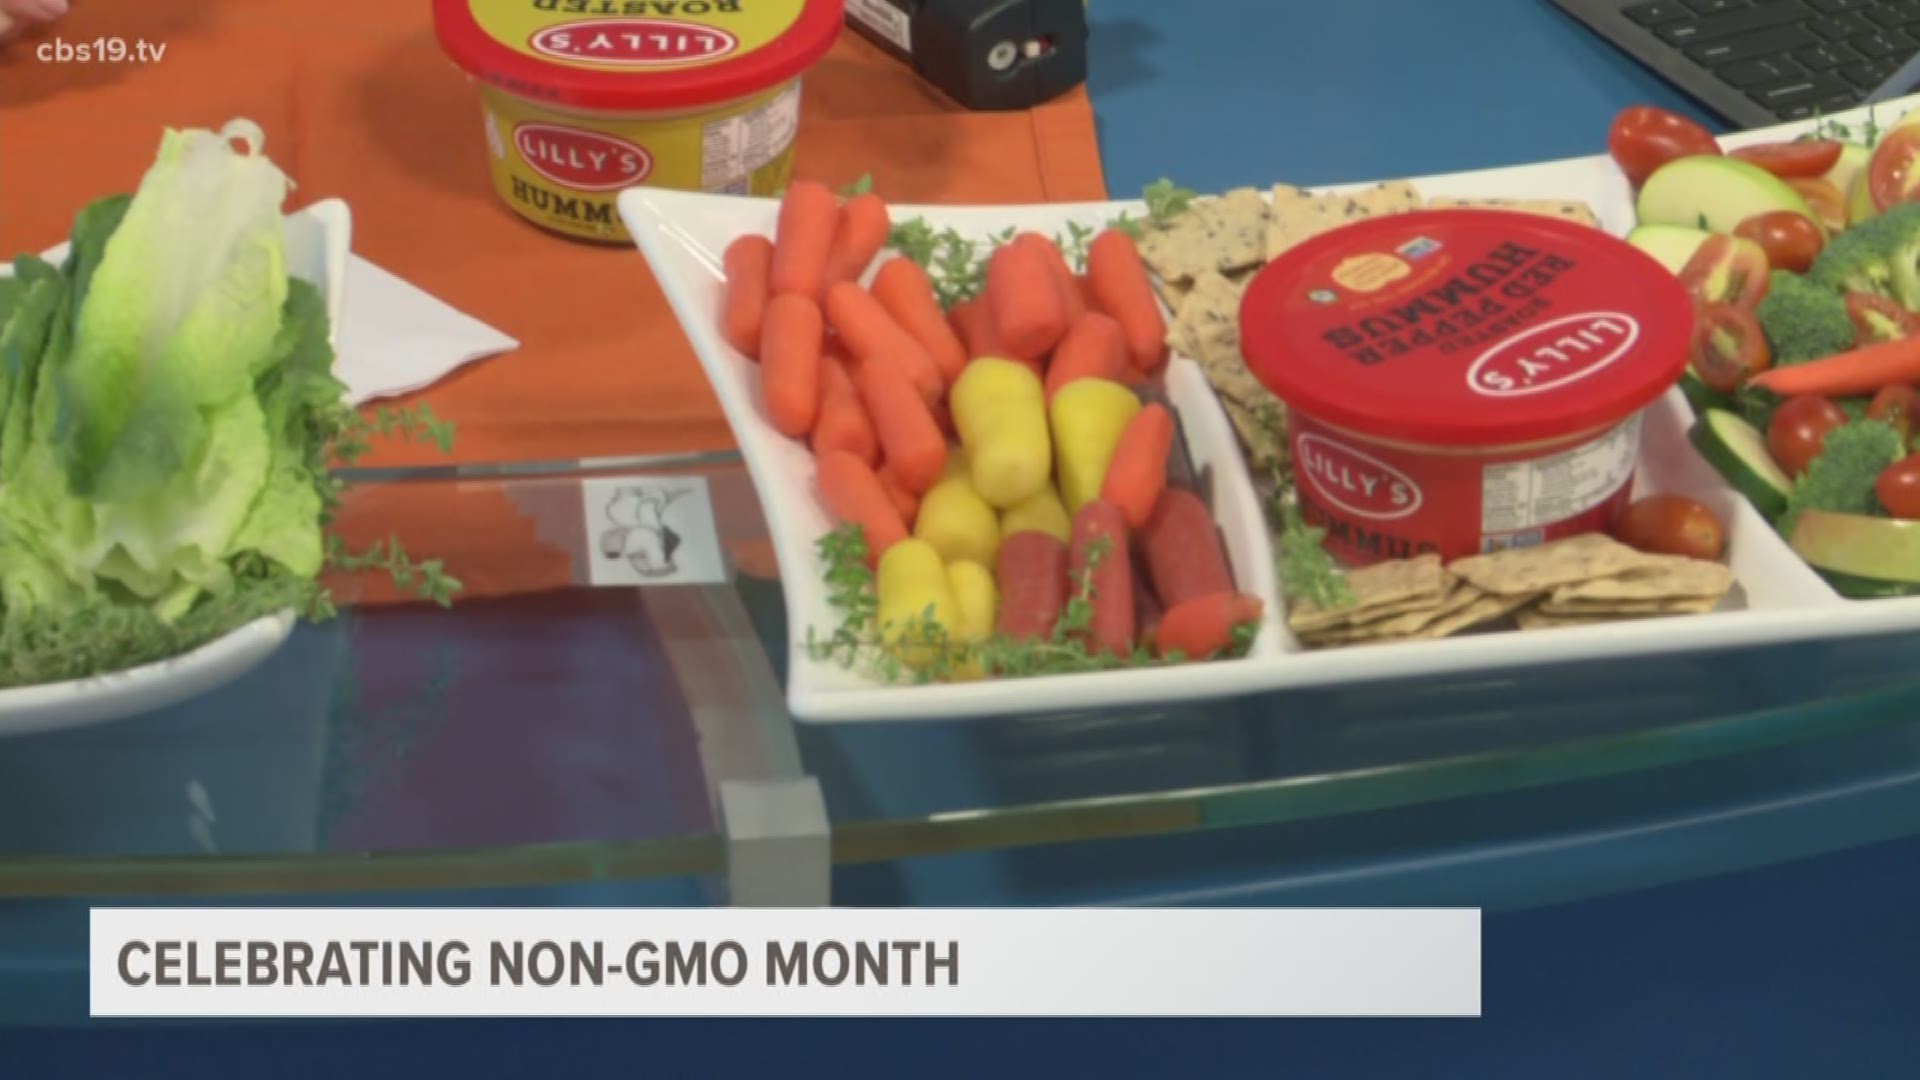 To recognize Non-GMO month, food expert Sharon Seibenlist offers more healthy food options.